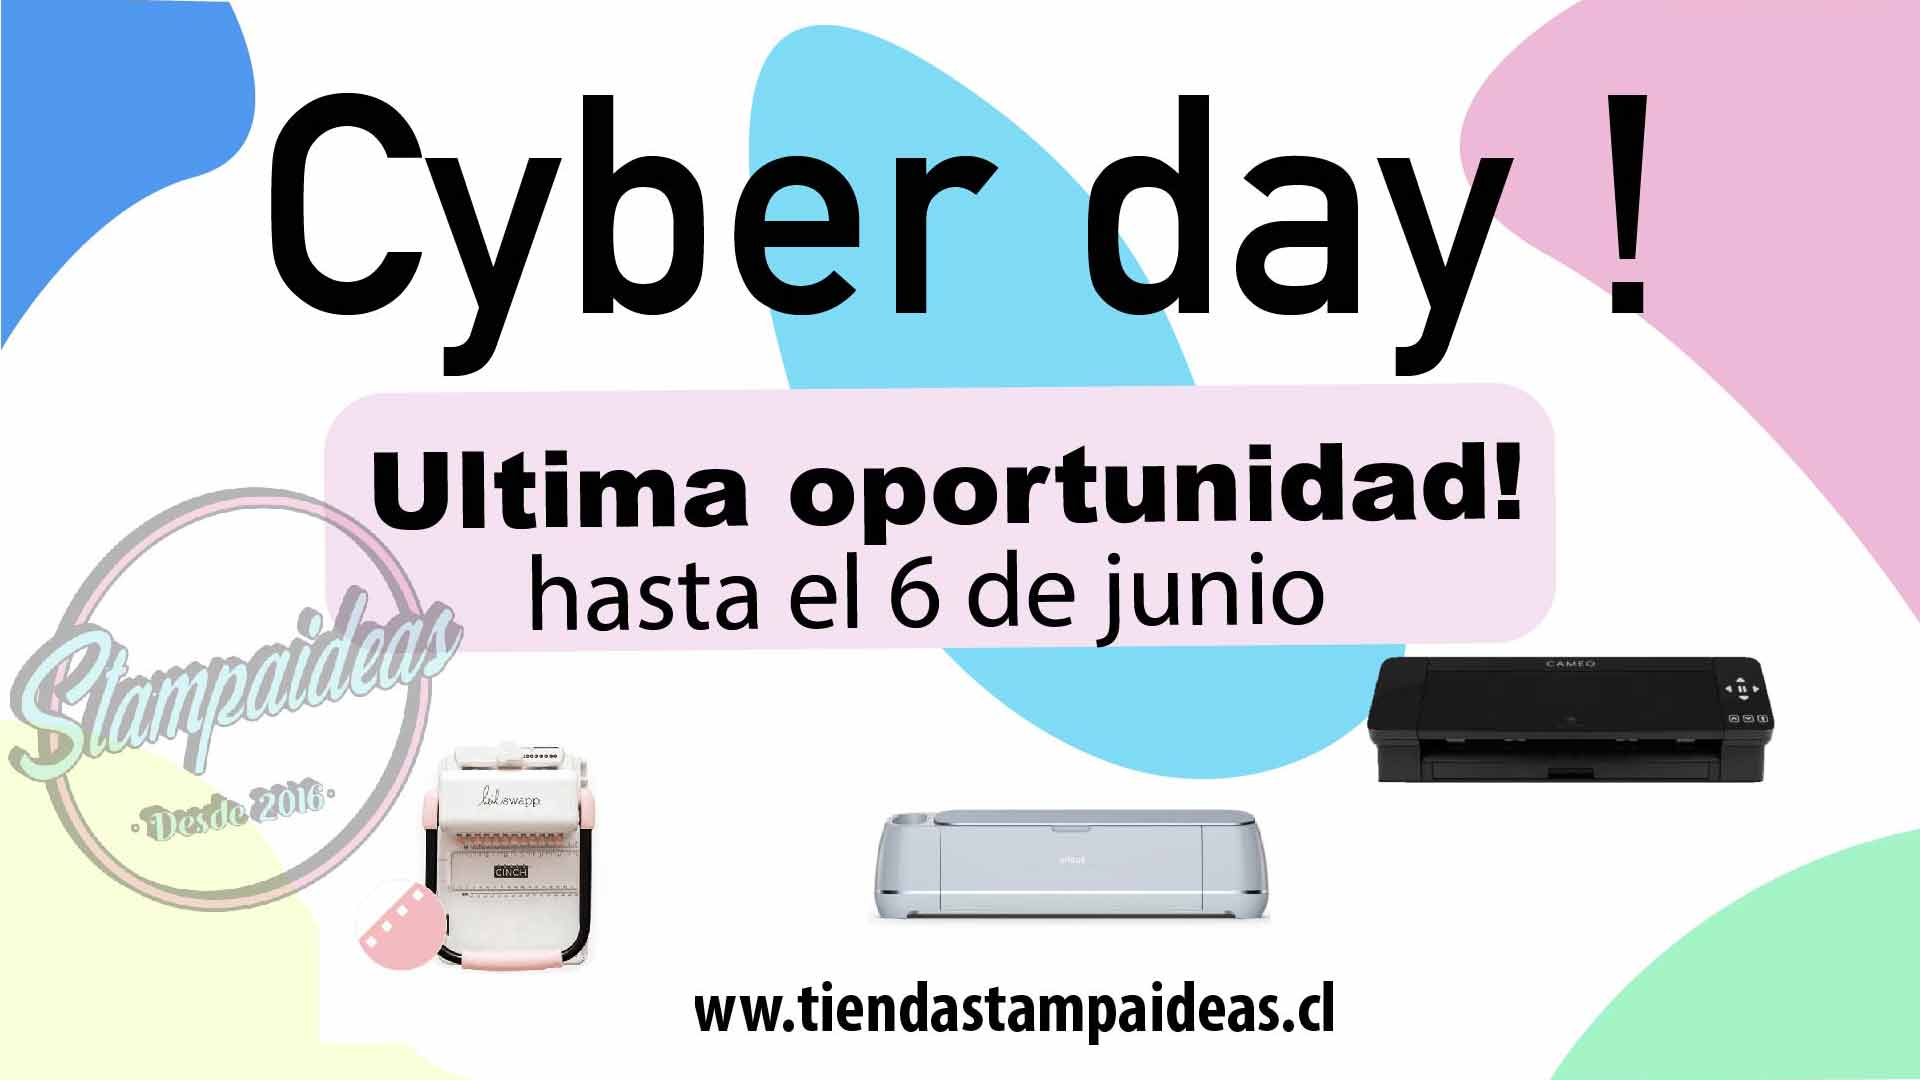 Super cyberday extendido Stampaideas